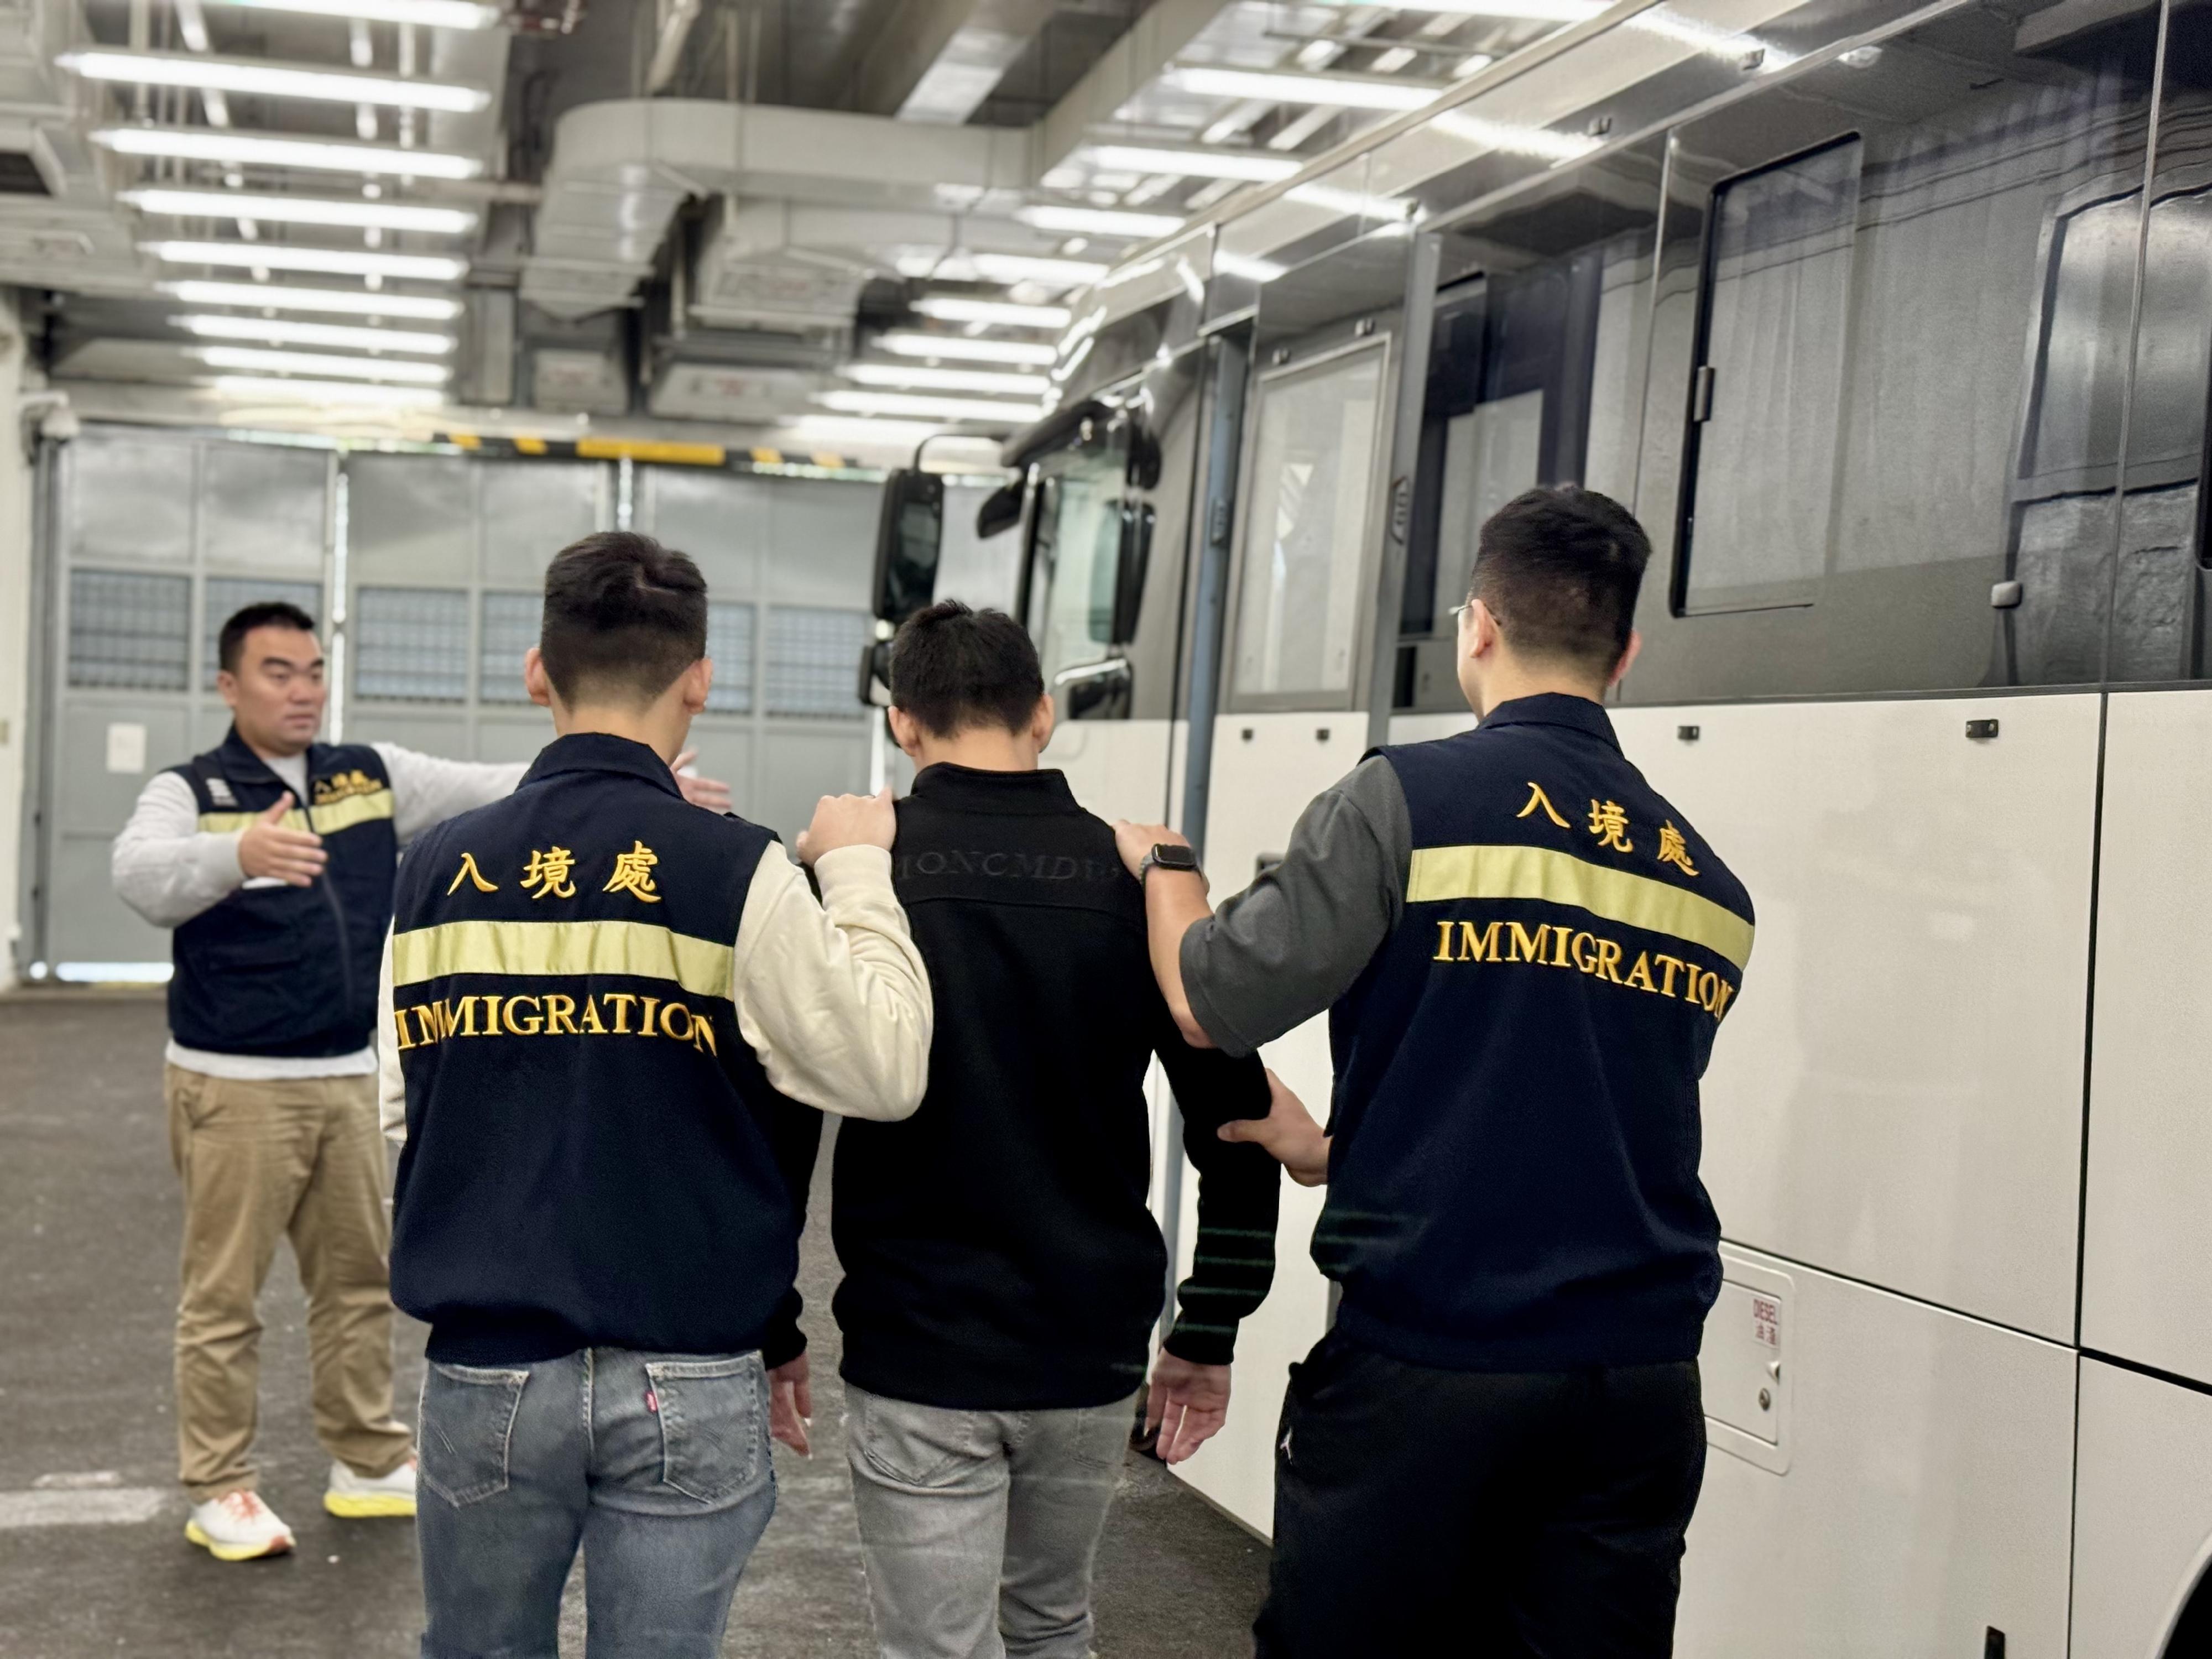 The Immigration Department (ImmD) carried out a repatriation operation today (December 28). A total of 16 Vietnamese illegal immigrants were repatriated to Vietnam. Photo shows removee being escorted by ImmD officers to proceed from the detention place to the airport.